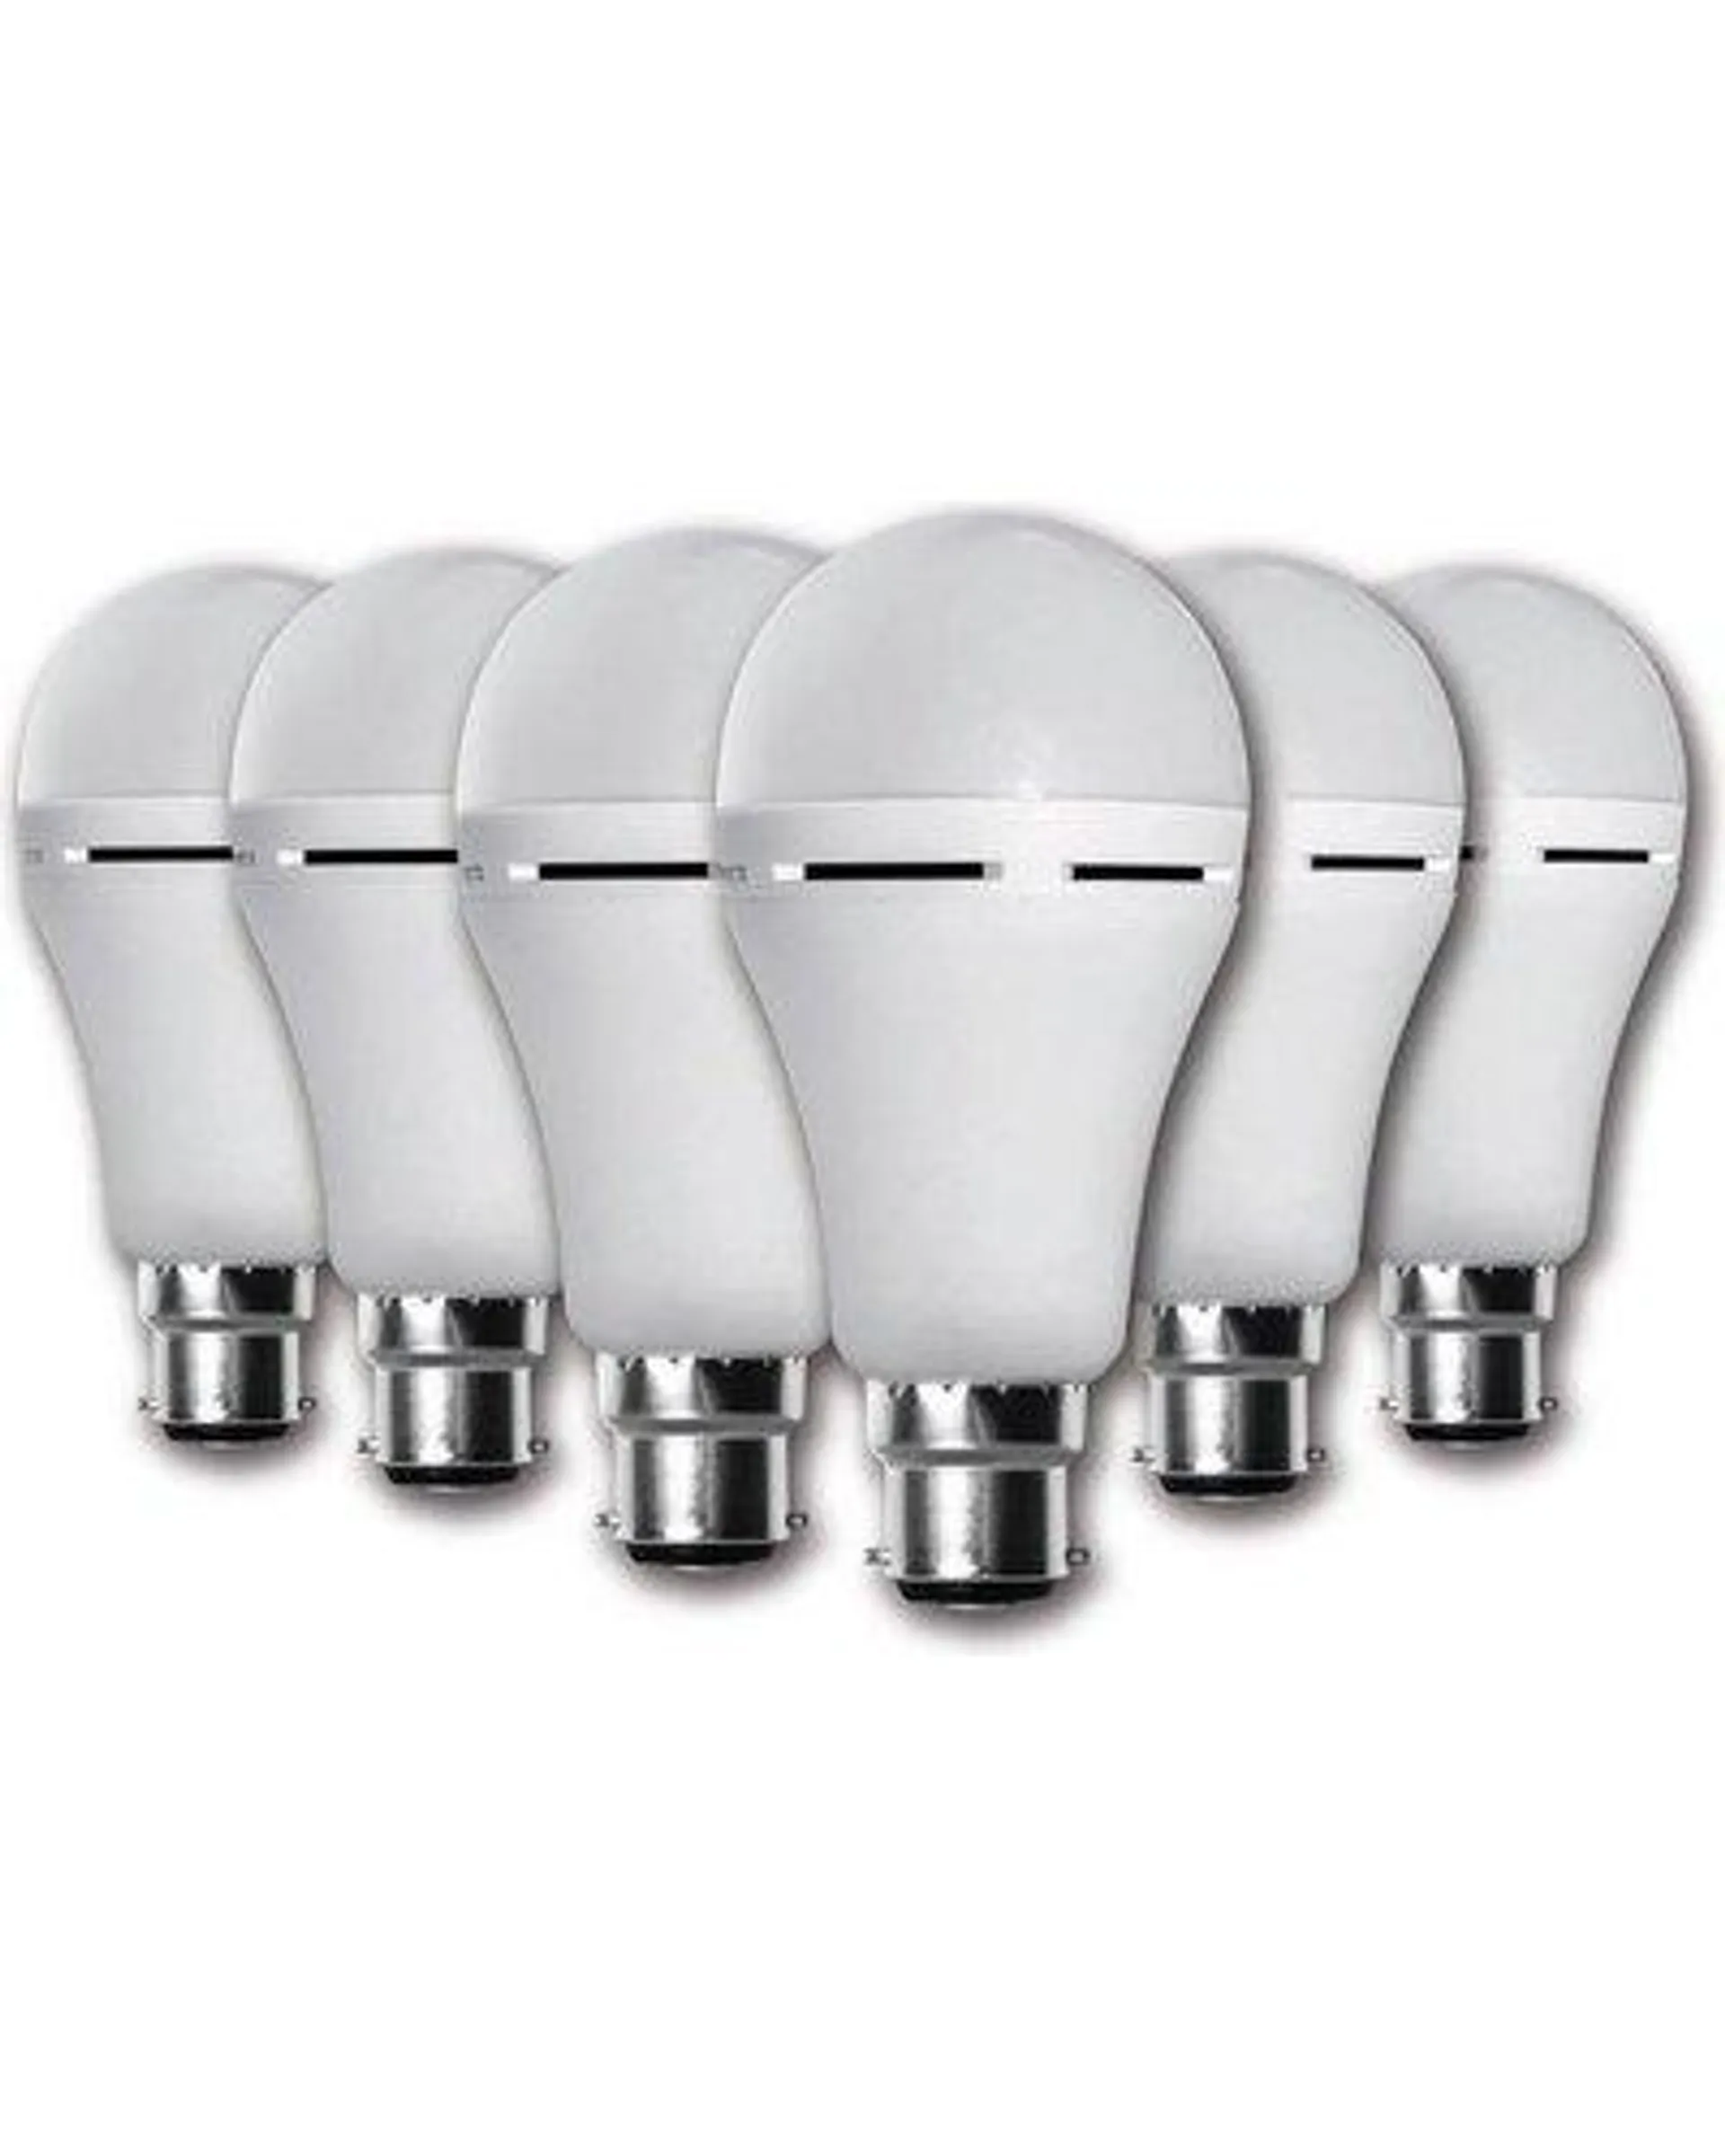 Elecstor B22 7W Rechargeable LED Bulb (Cool White)(Pack of 6)